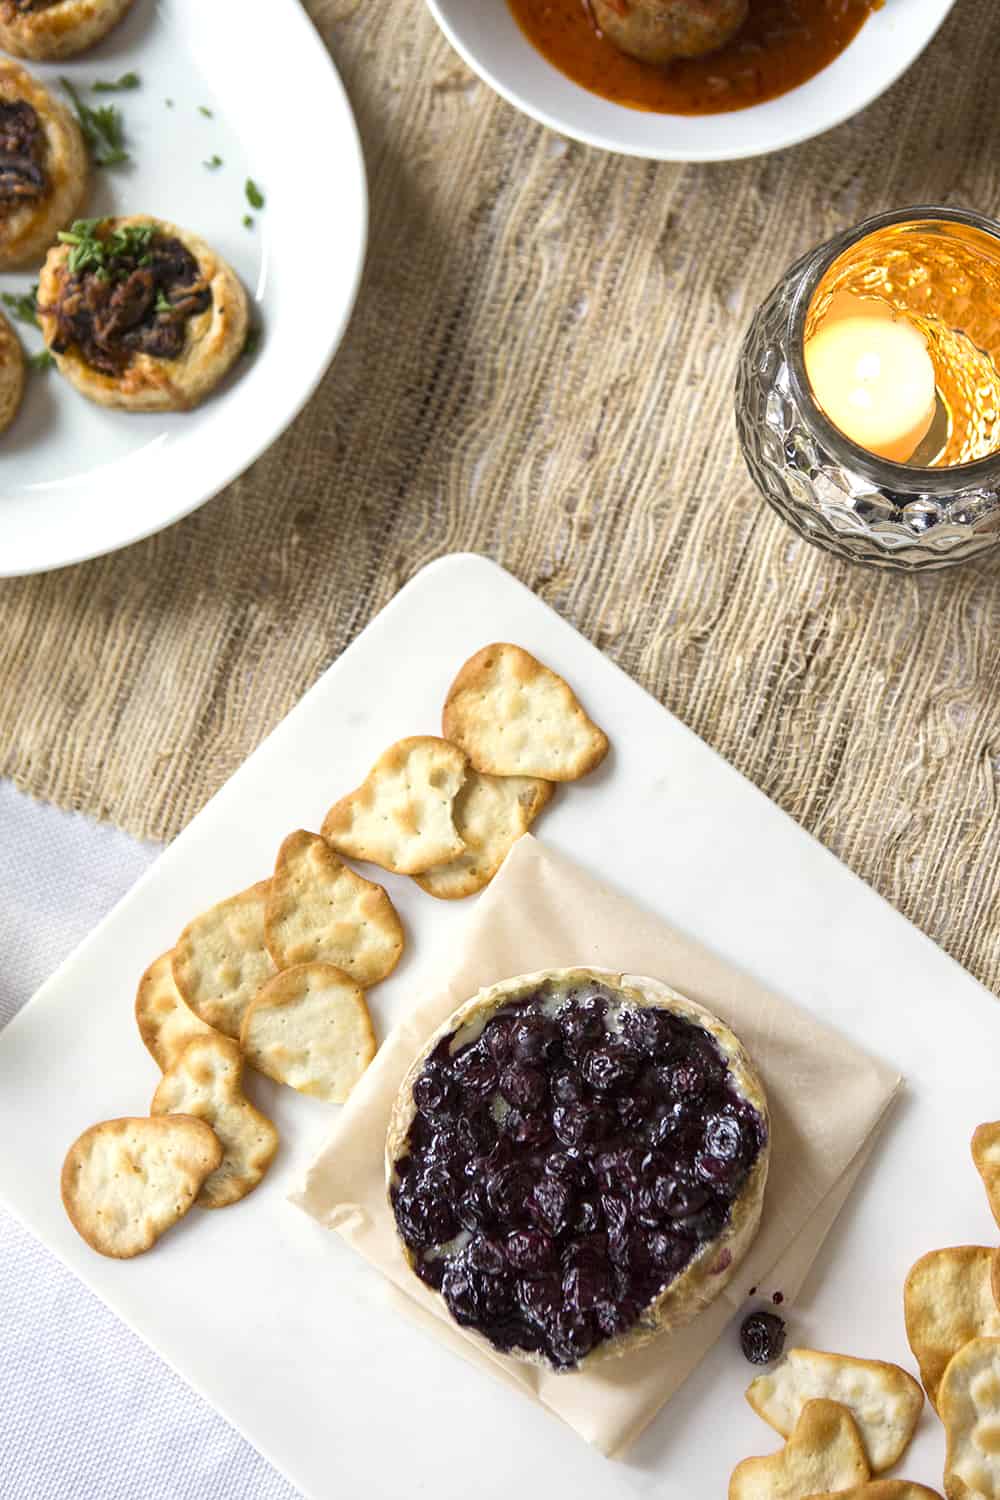 Baked Brie with Wine-Soaked Blueberries